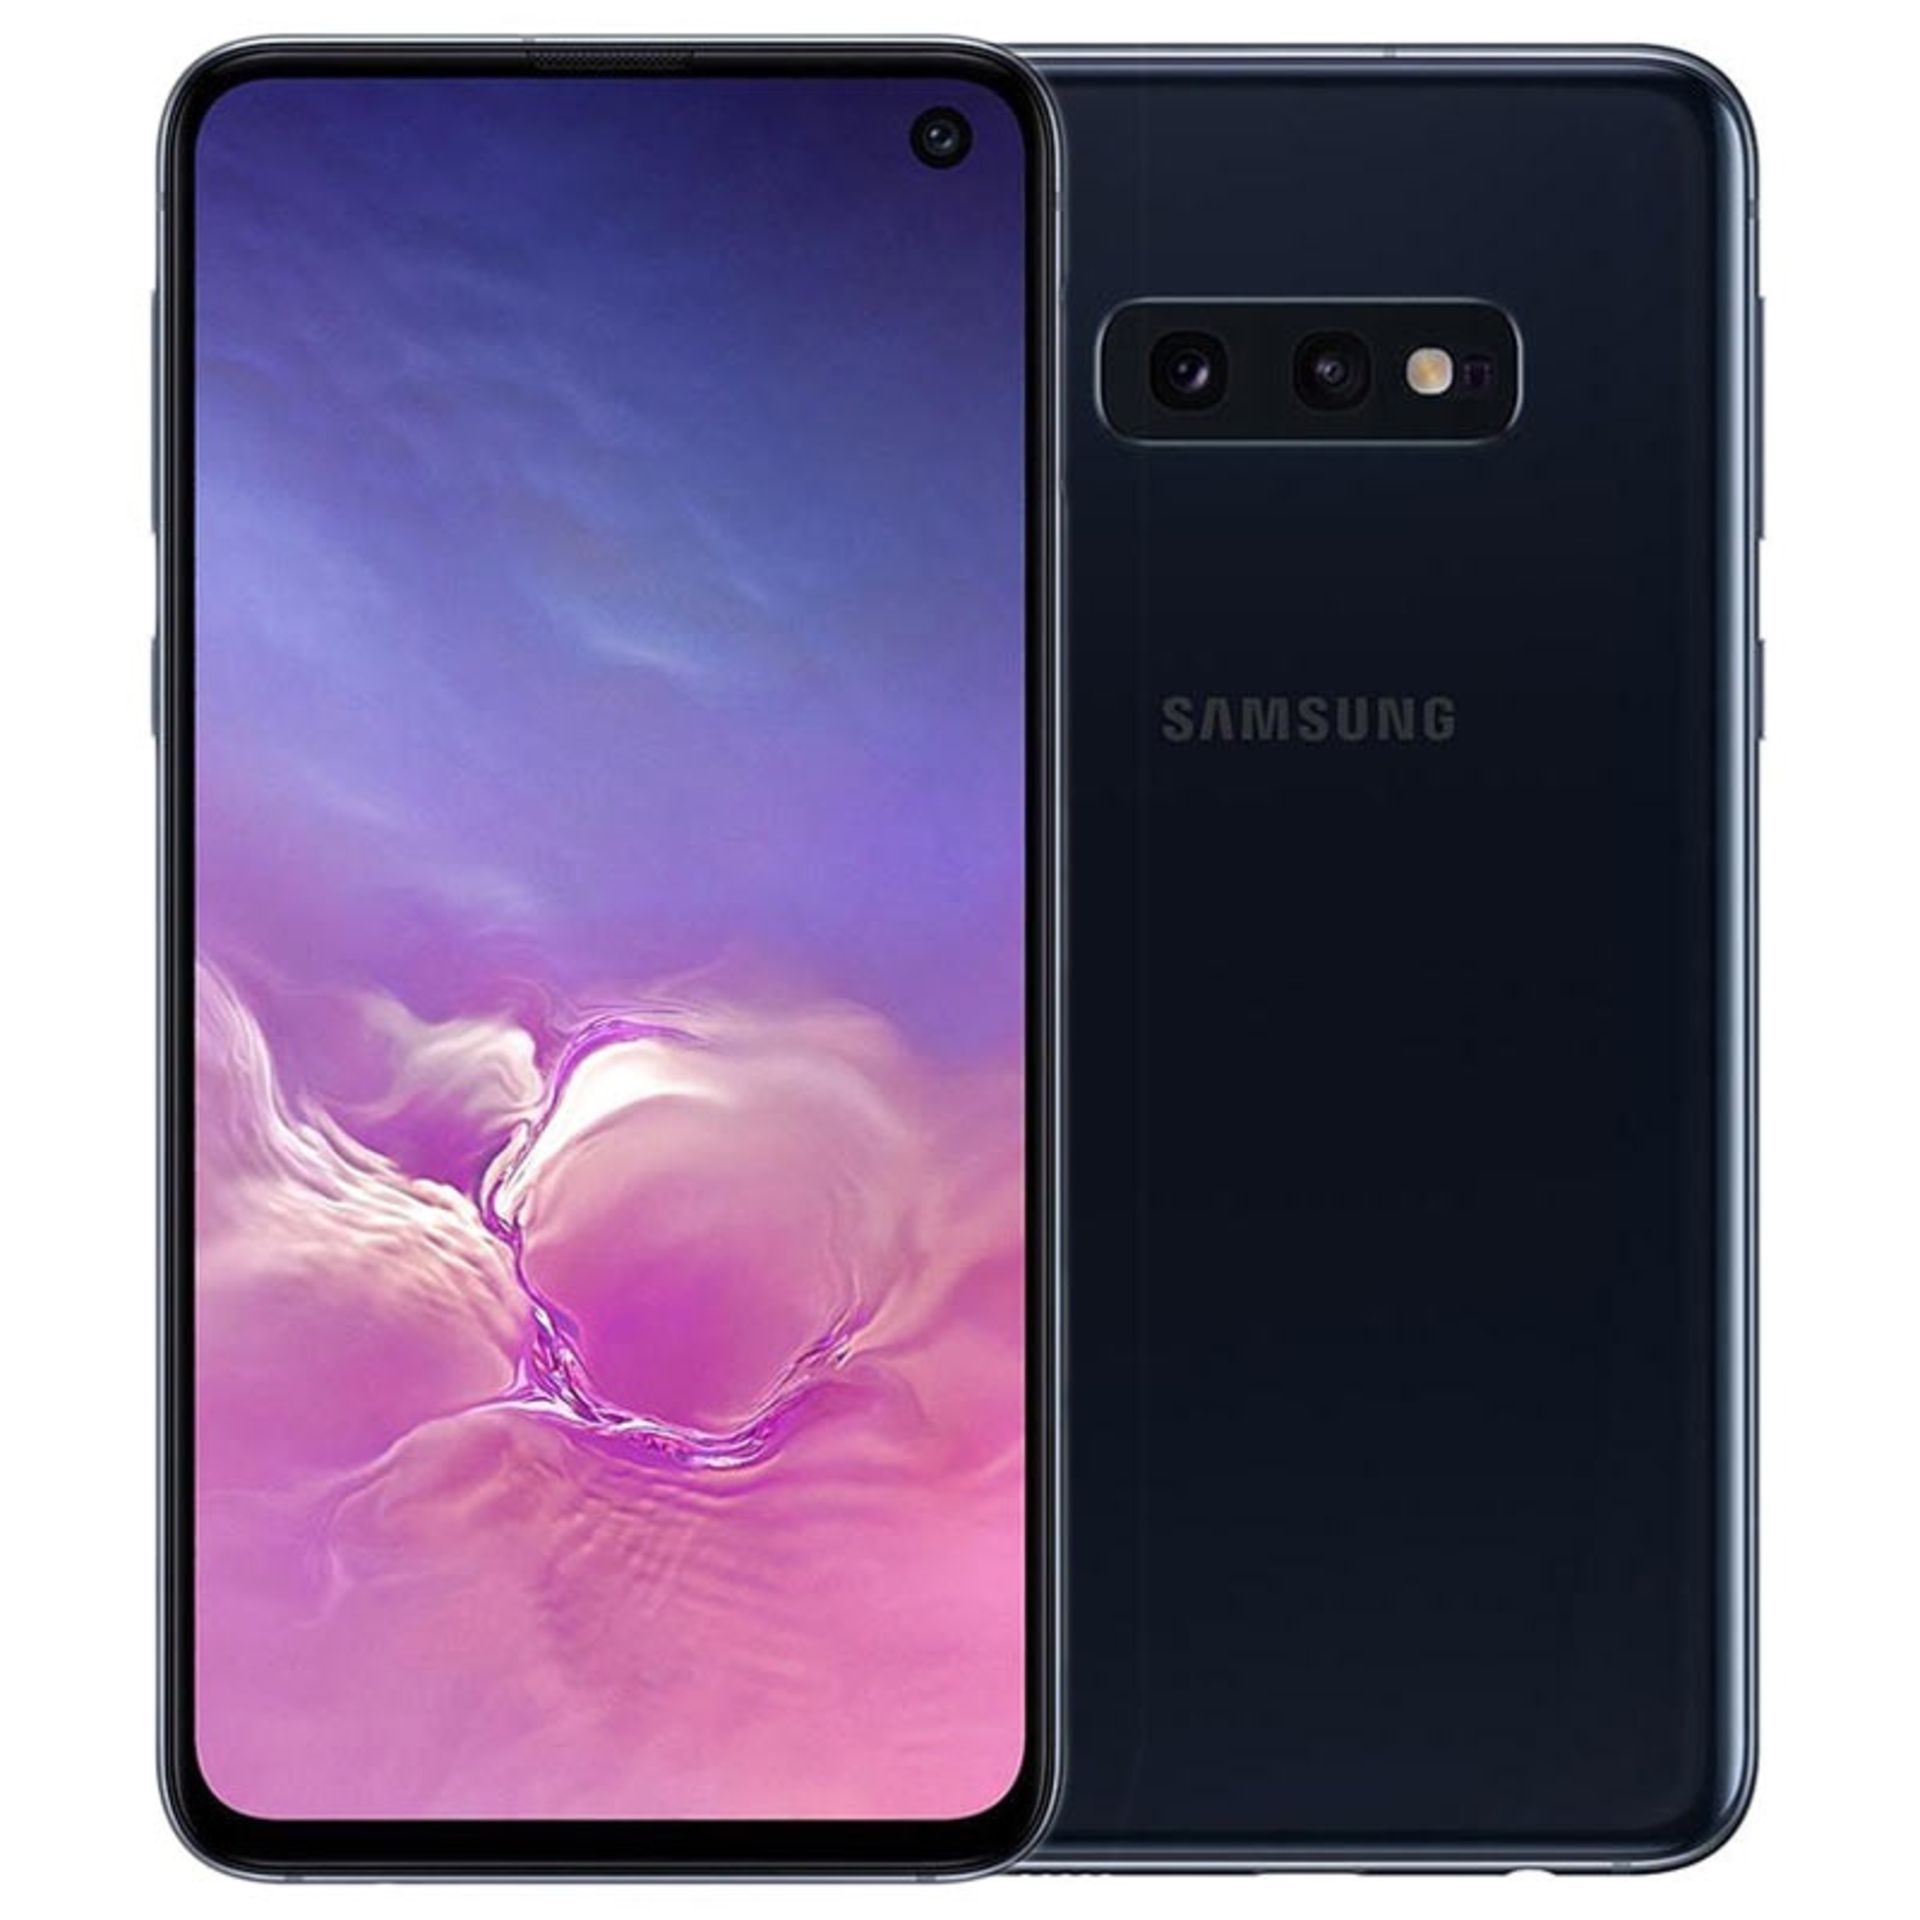 + VAT Grade A Samsung Galaxy S10e Mobile Phone - 128Gb - Black/Blue/Gold/Purple - Item Is Available